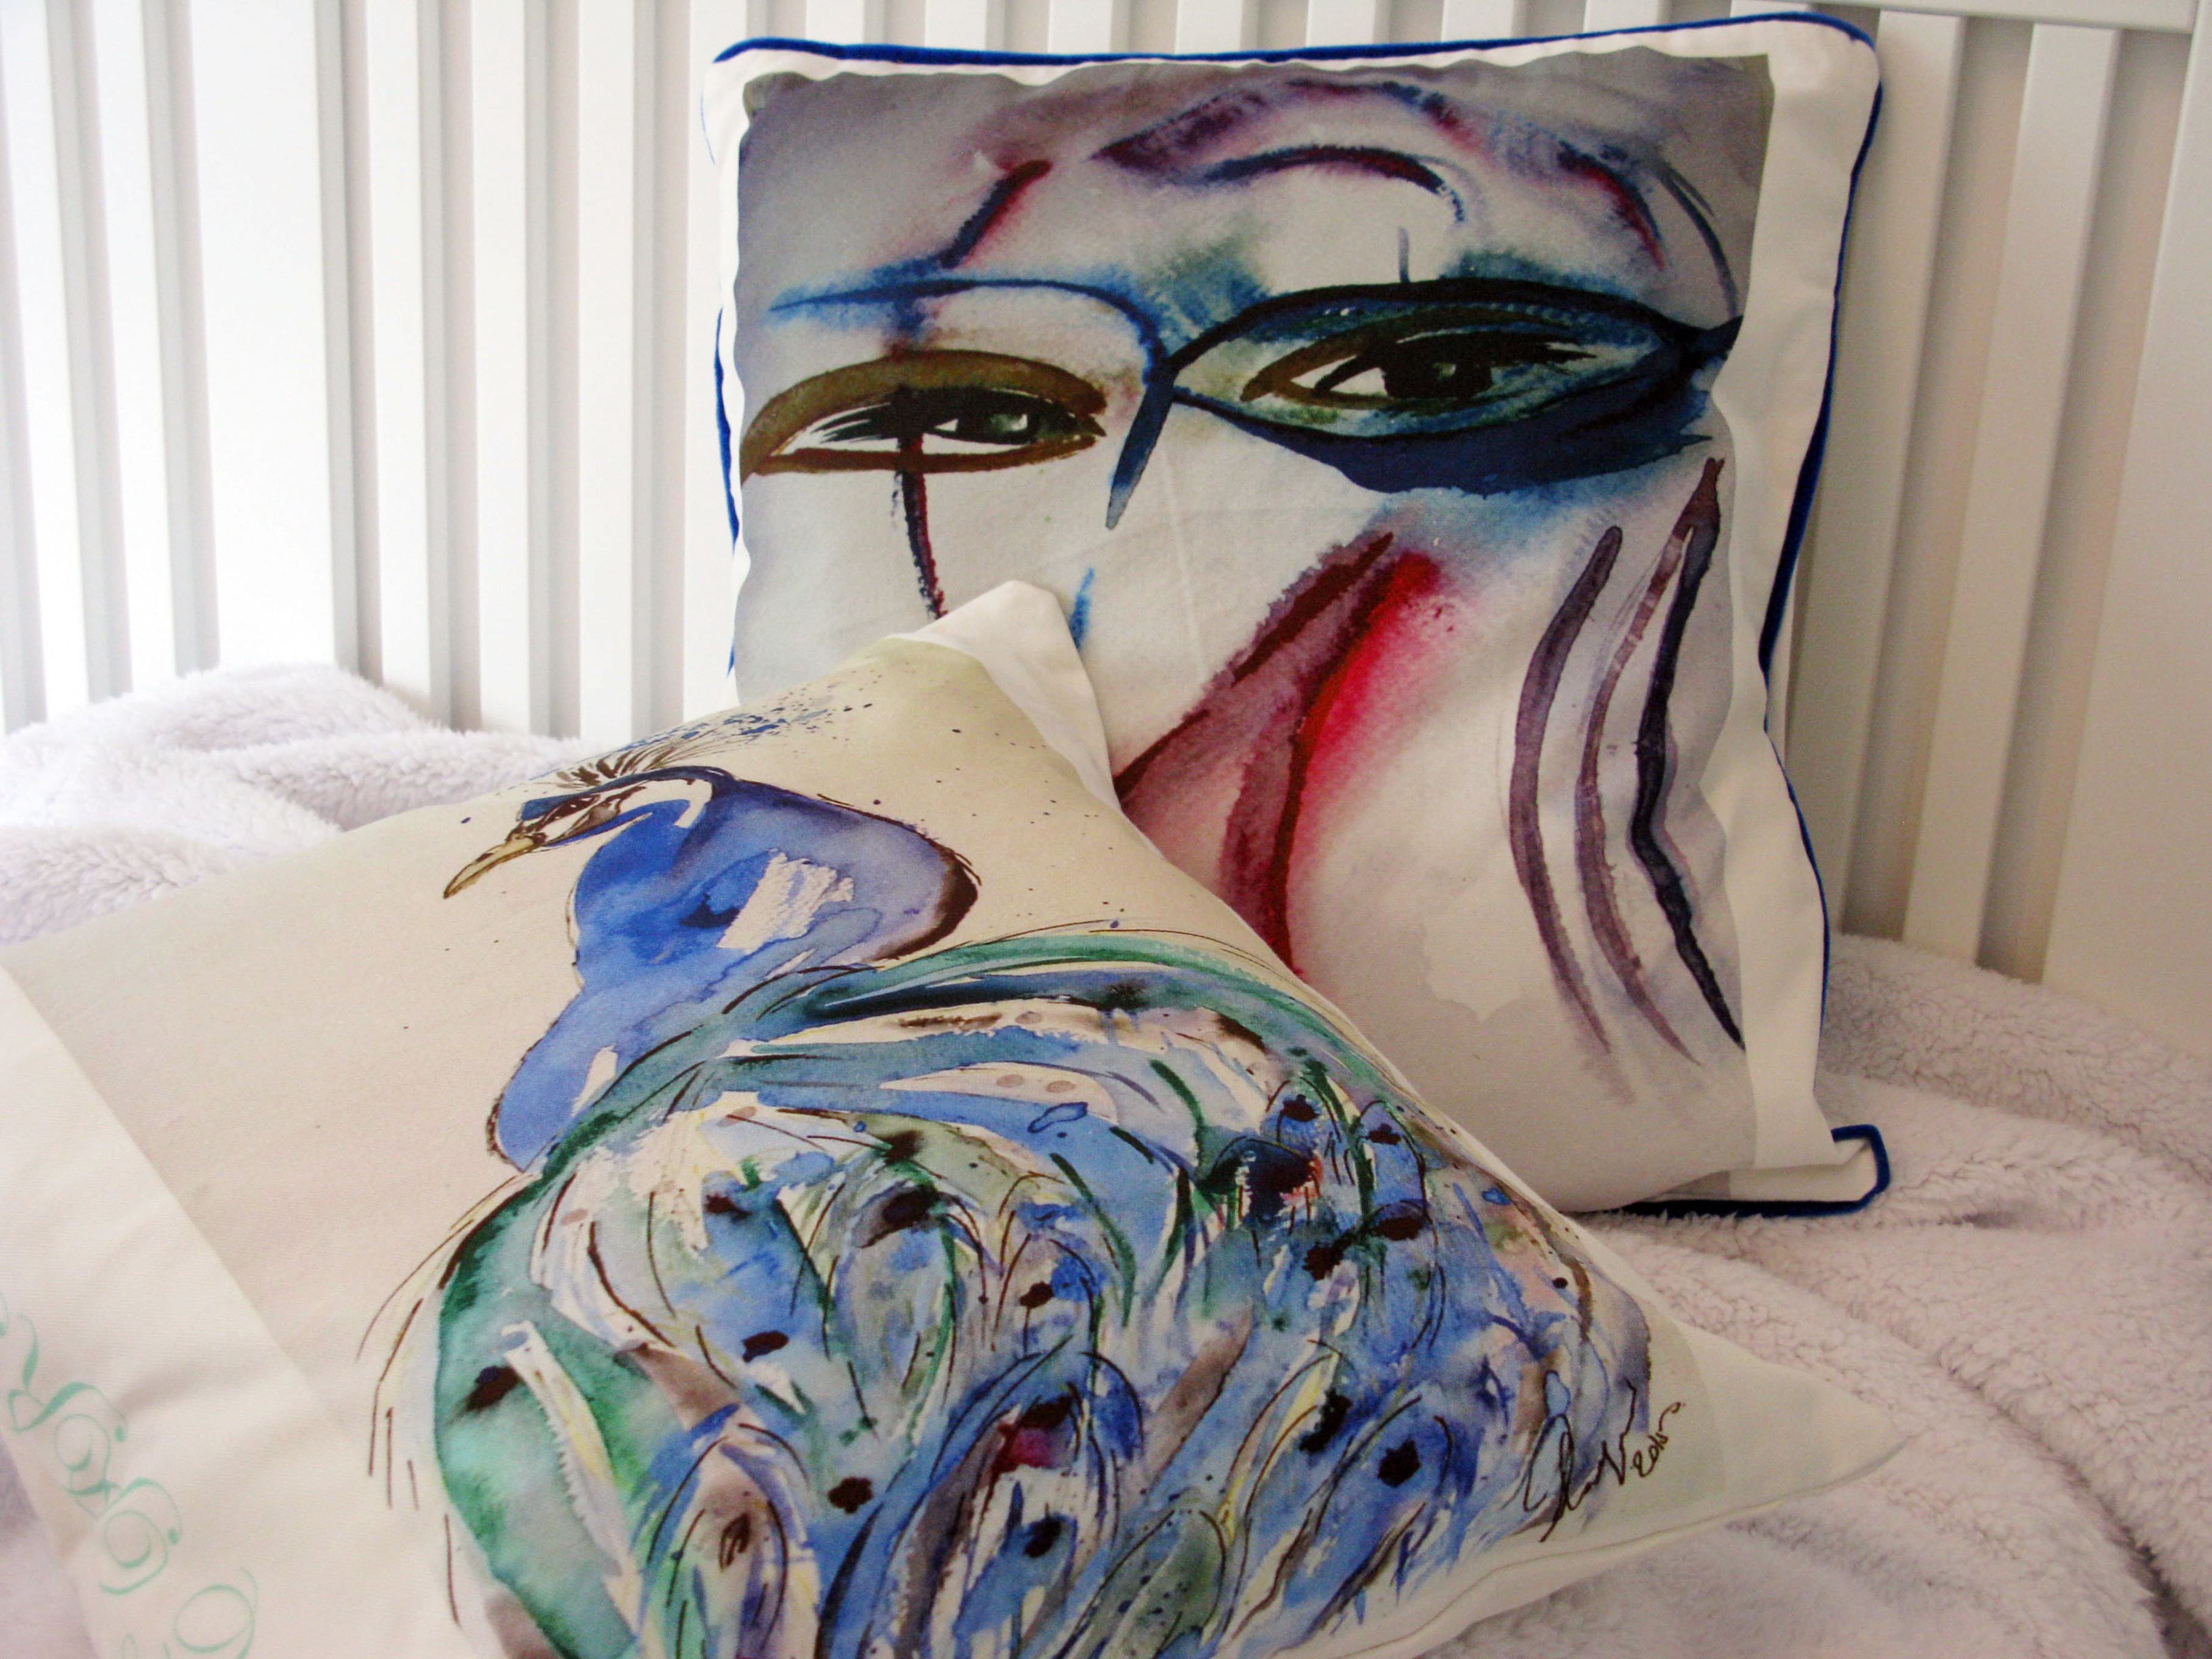 CUSHIONS COVER, BE A PRID PEACOCK